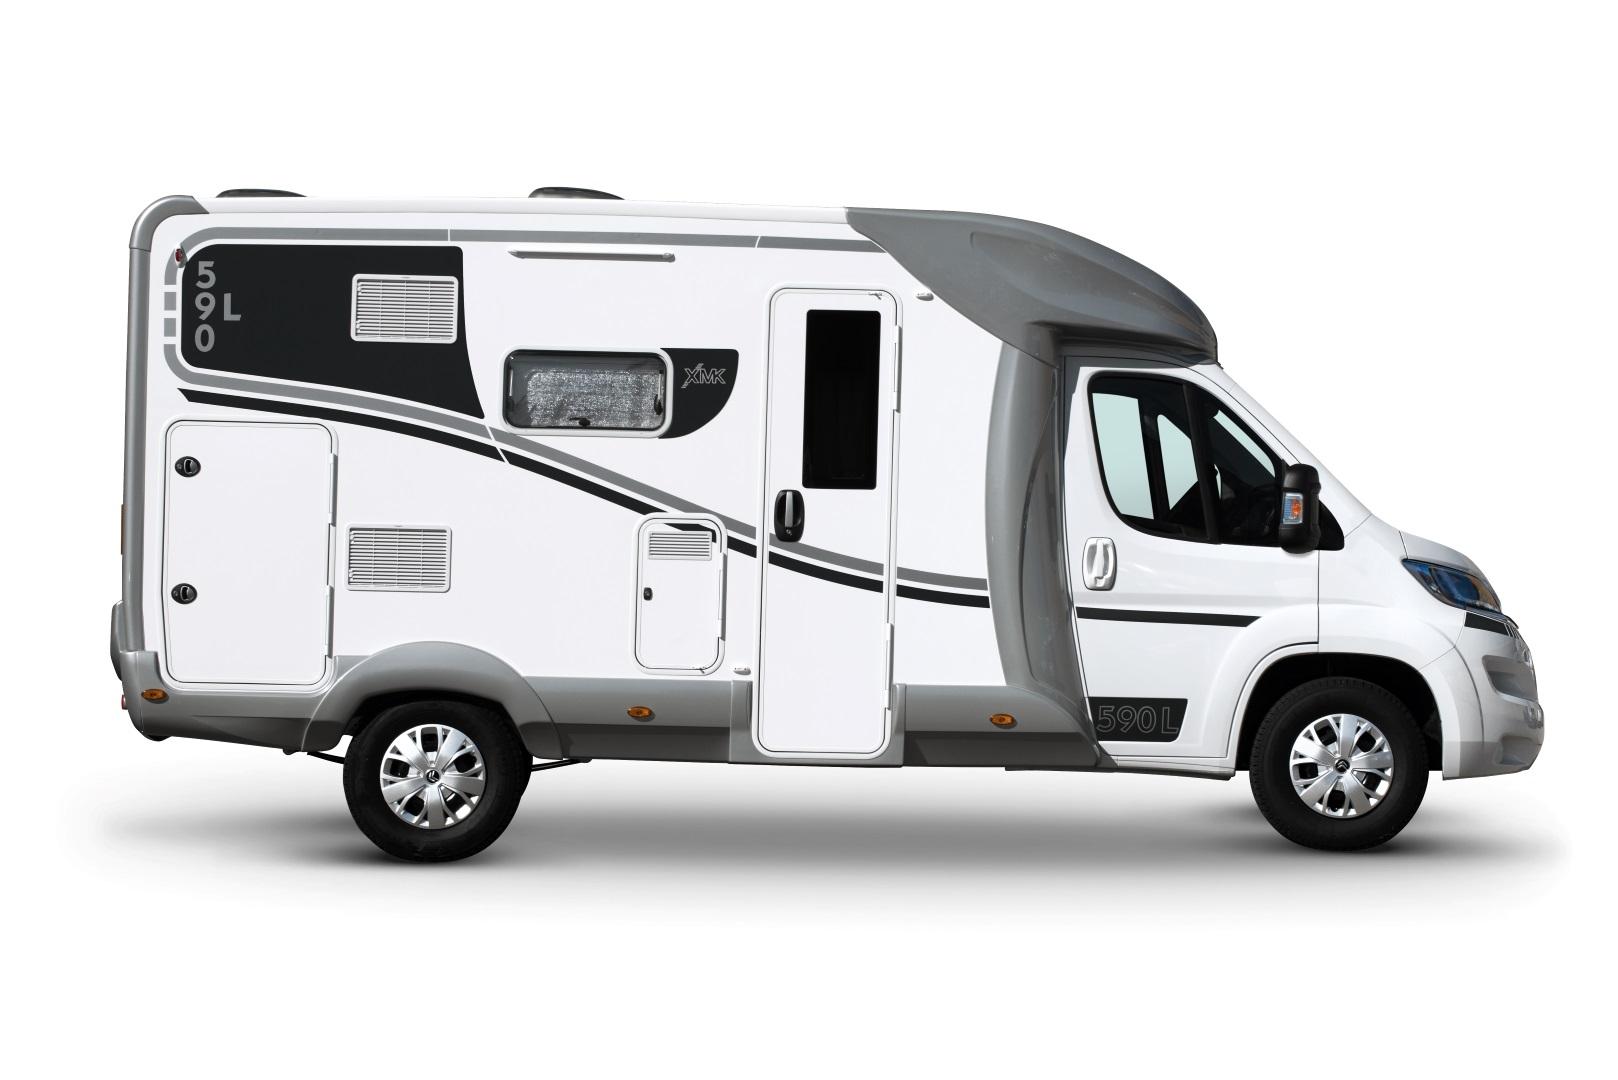 Ilusion XMK 590 L - a small motorhome for a family – image 1